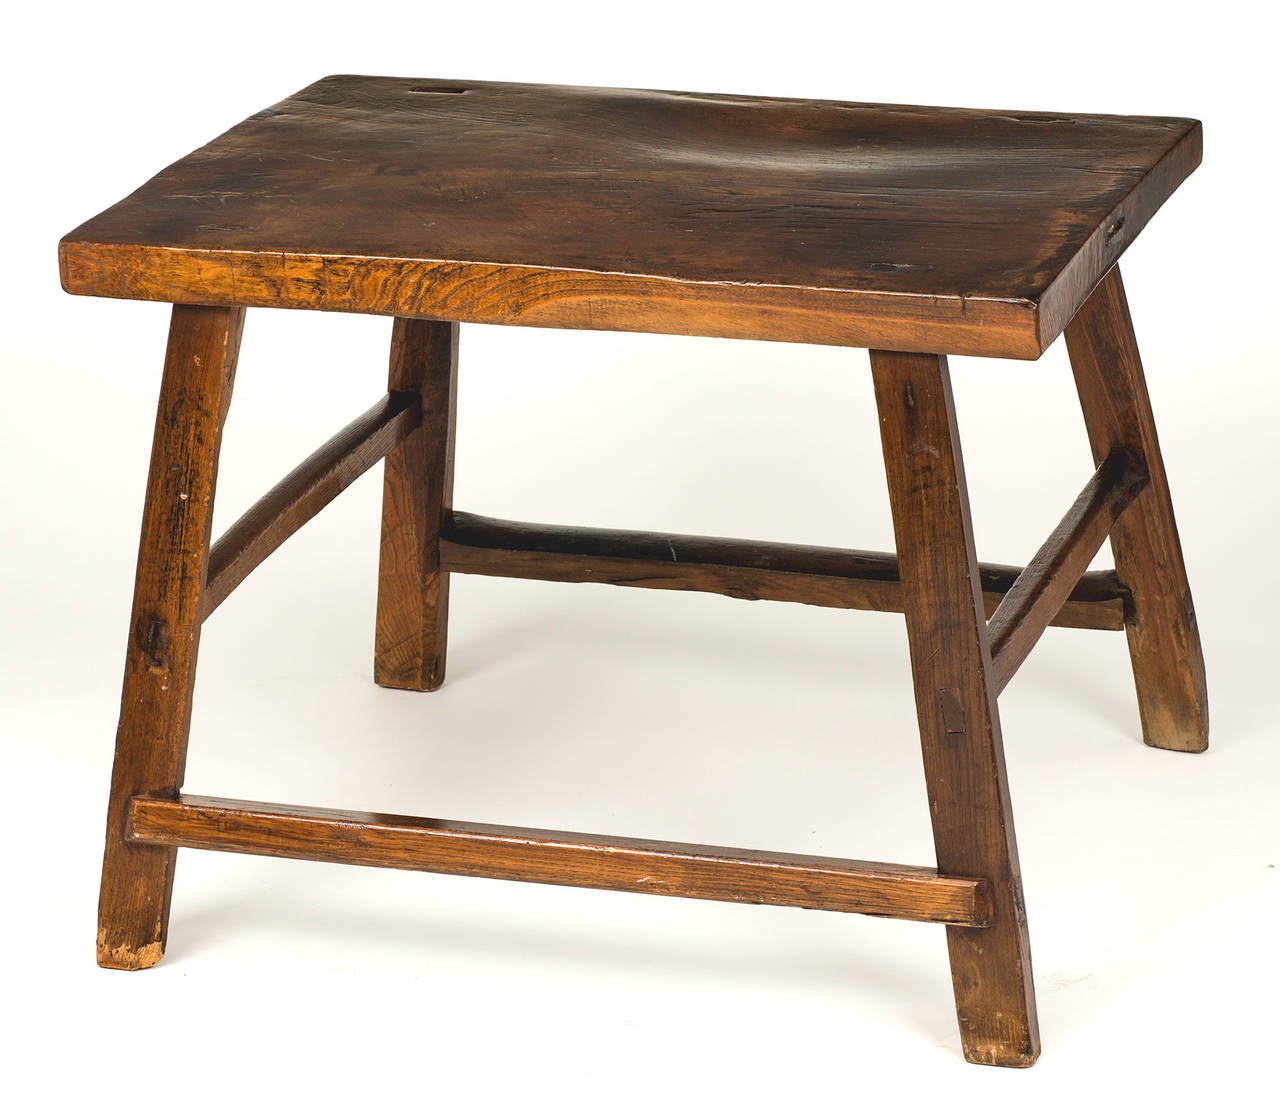 Chinese elmwood, circa 1900. Very versatile, use as table or bench.
Stabile and sturdy.